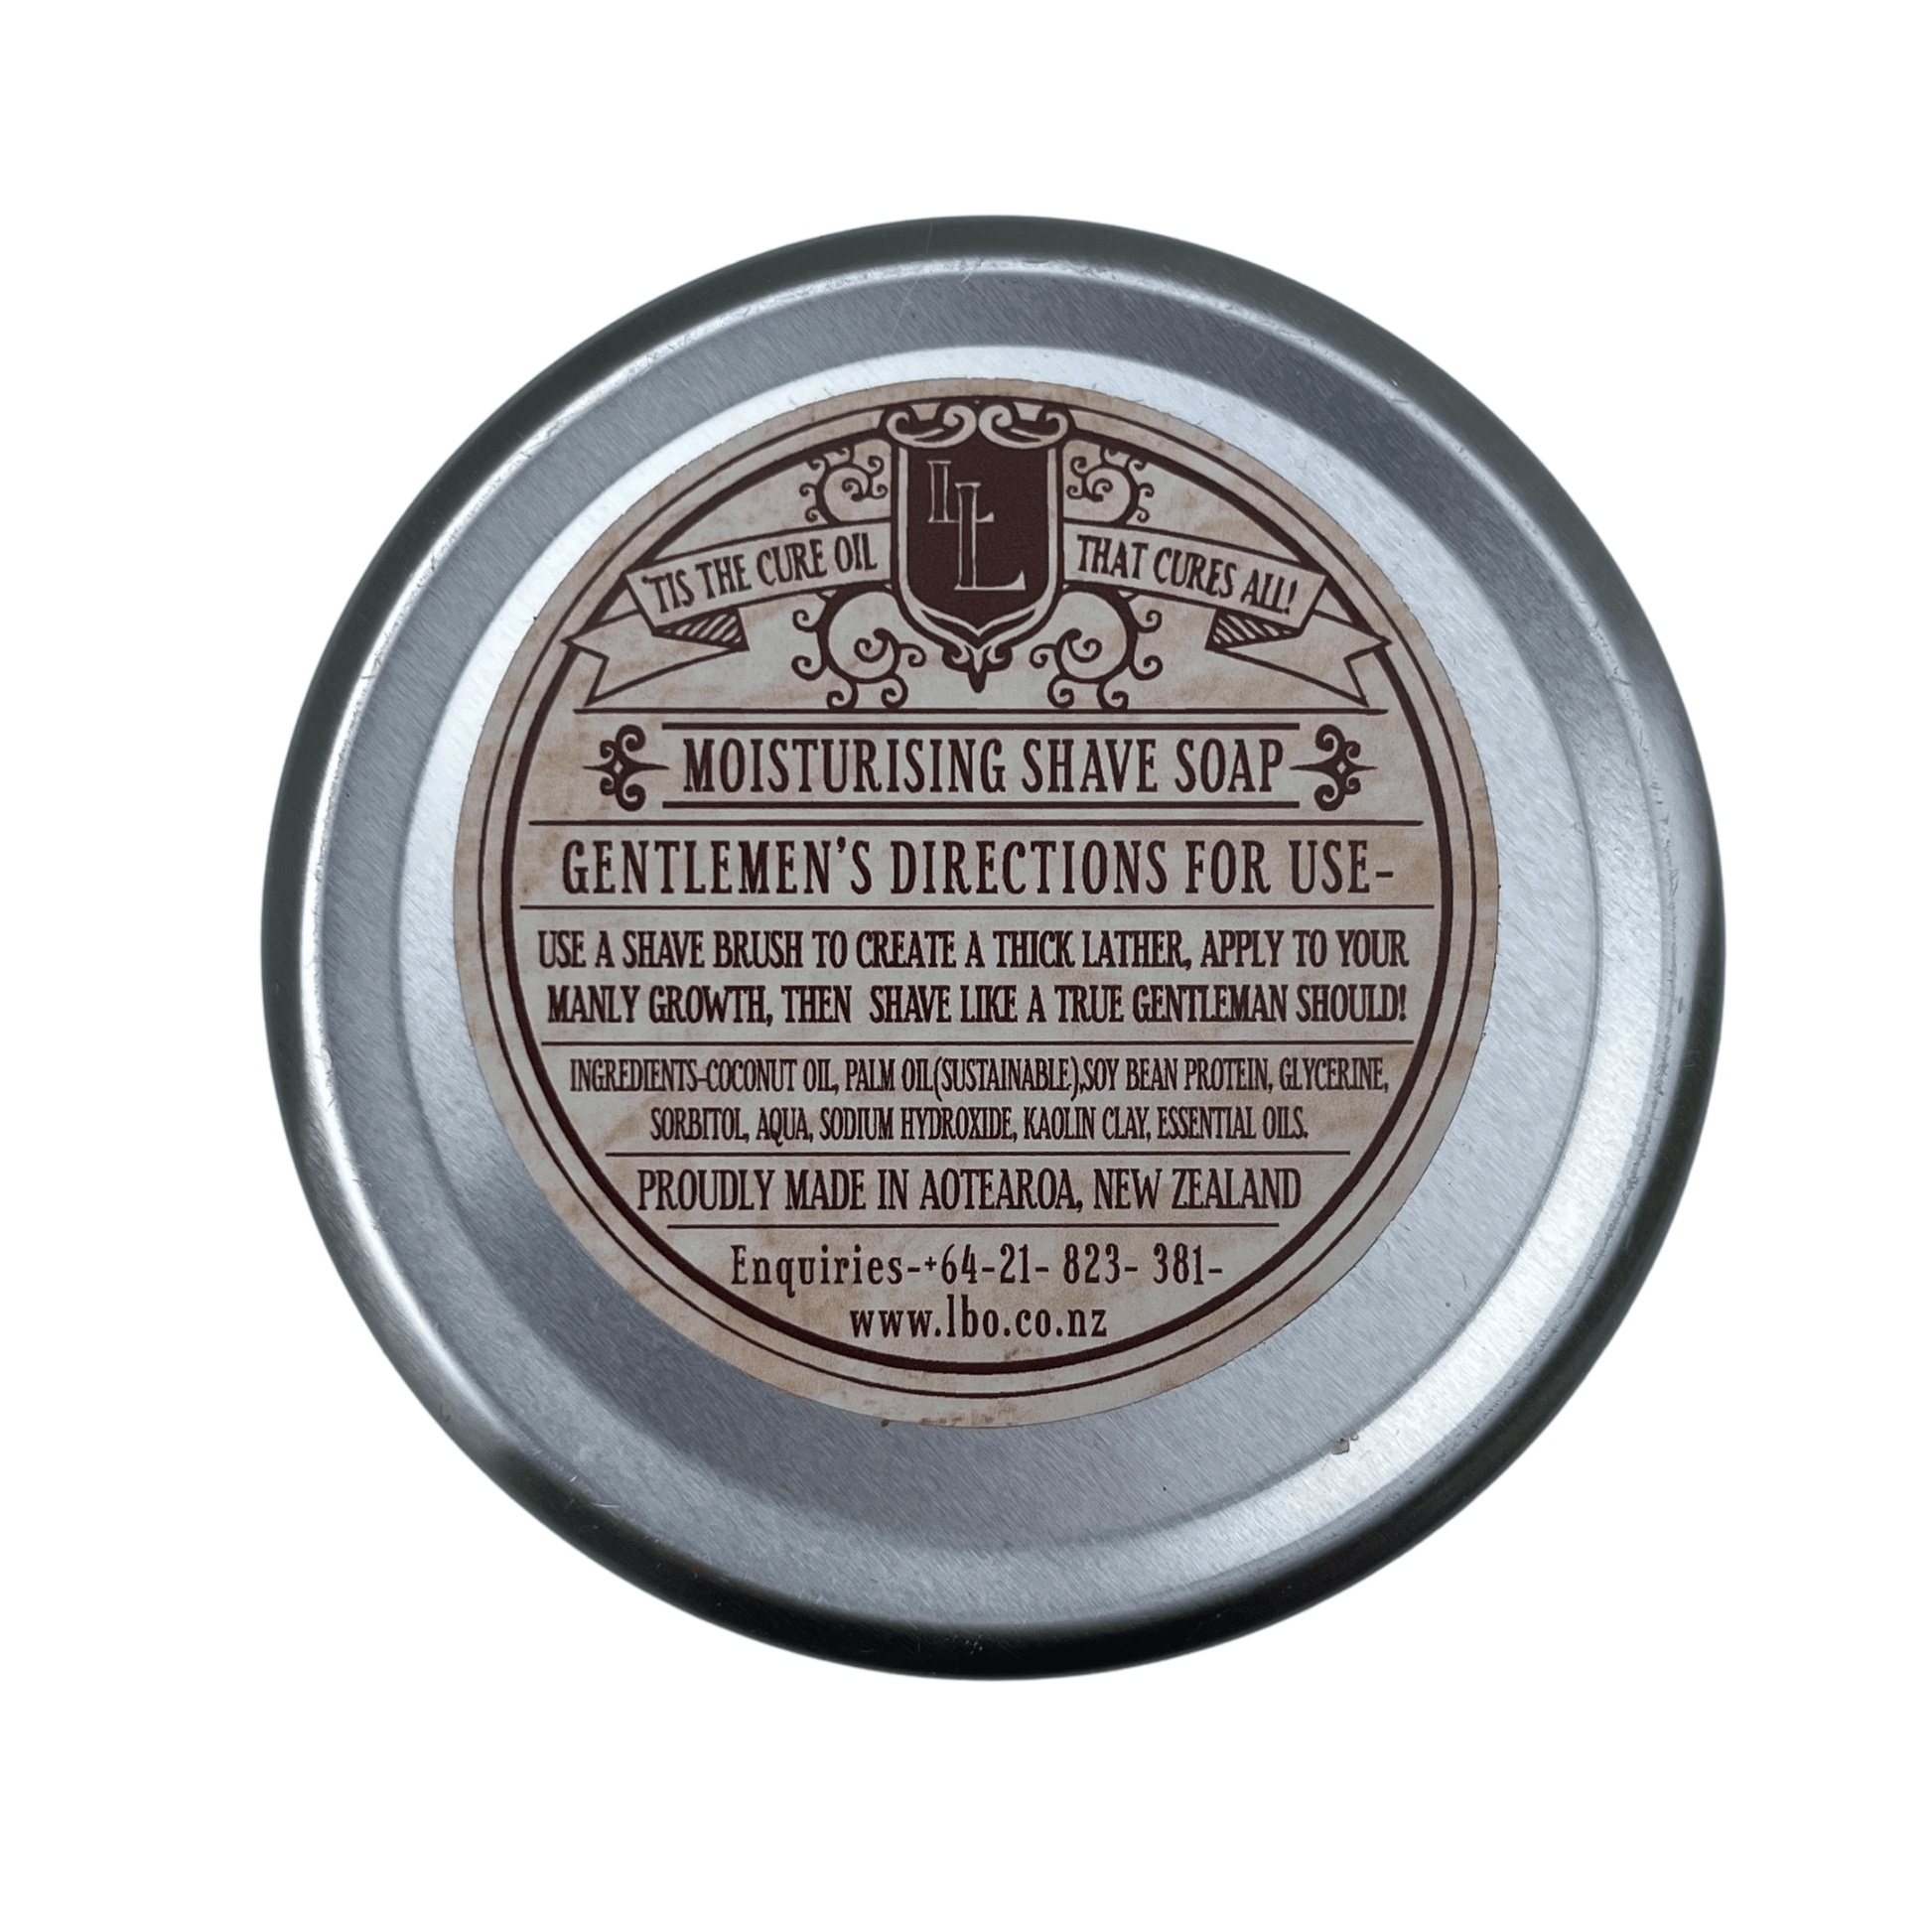 Underside of Metal tin of Lamberts Luscious shaving soap showing directions for use.